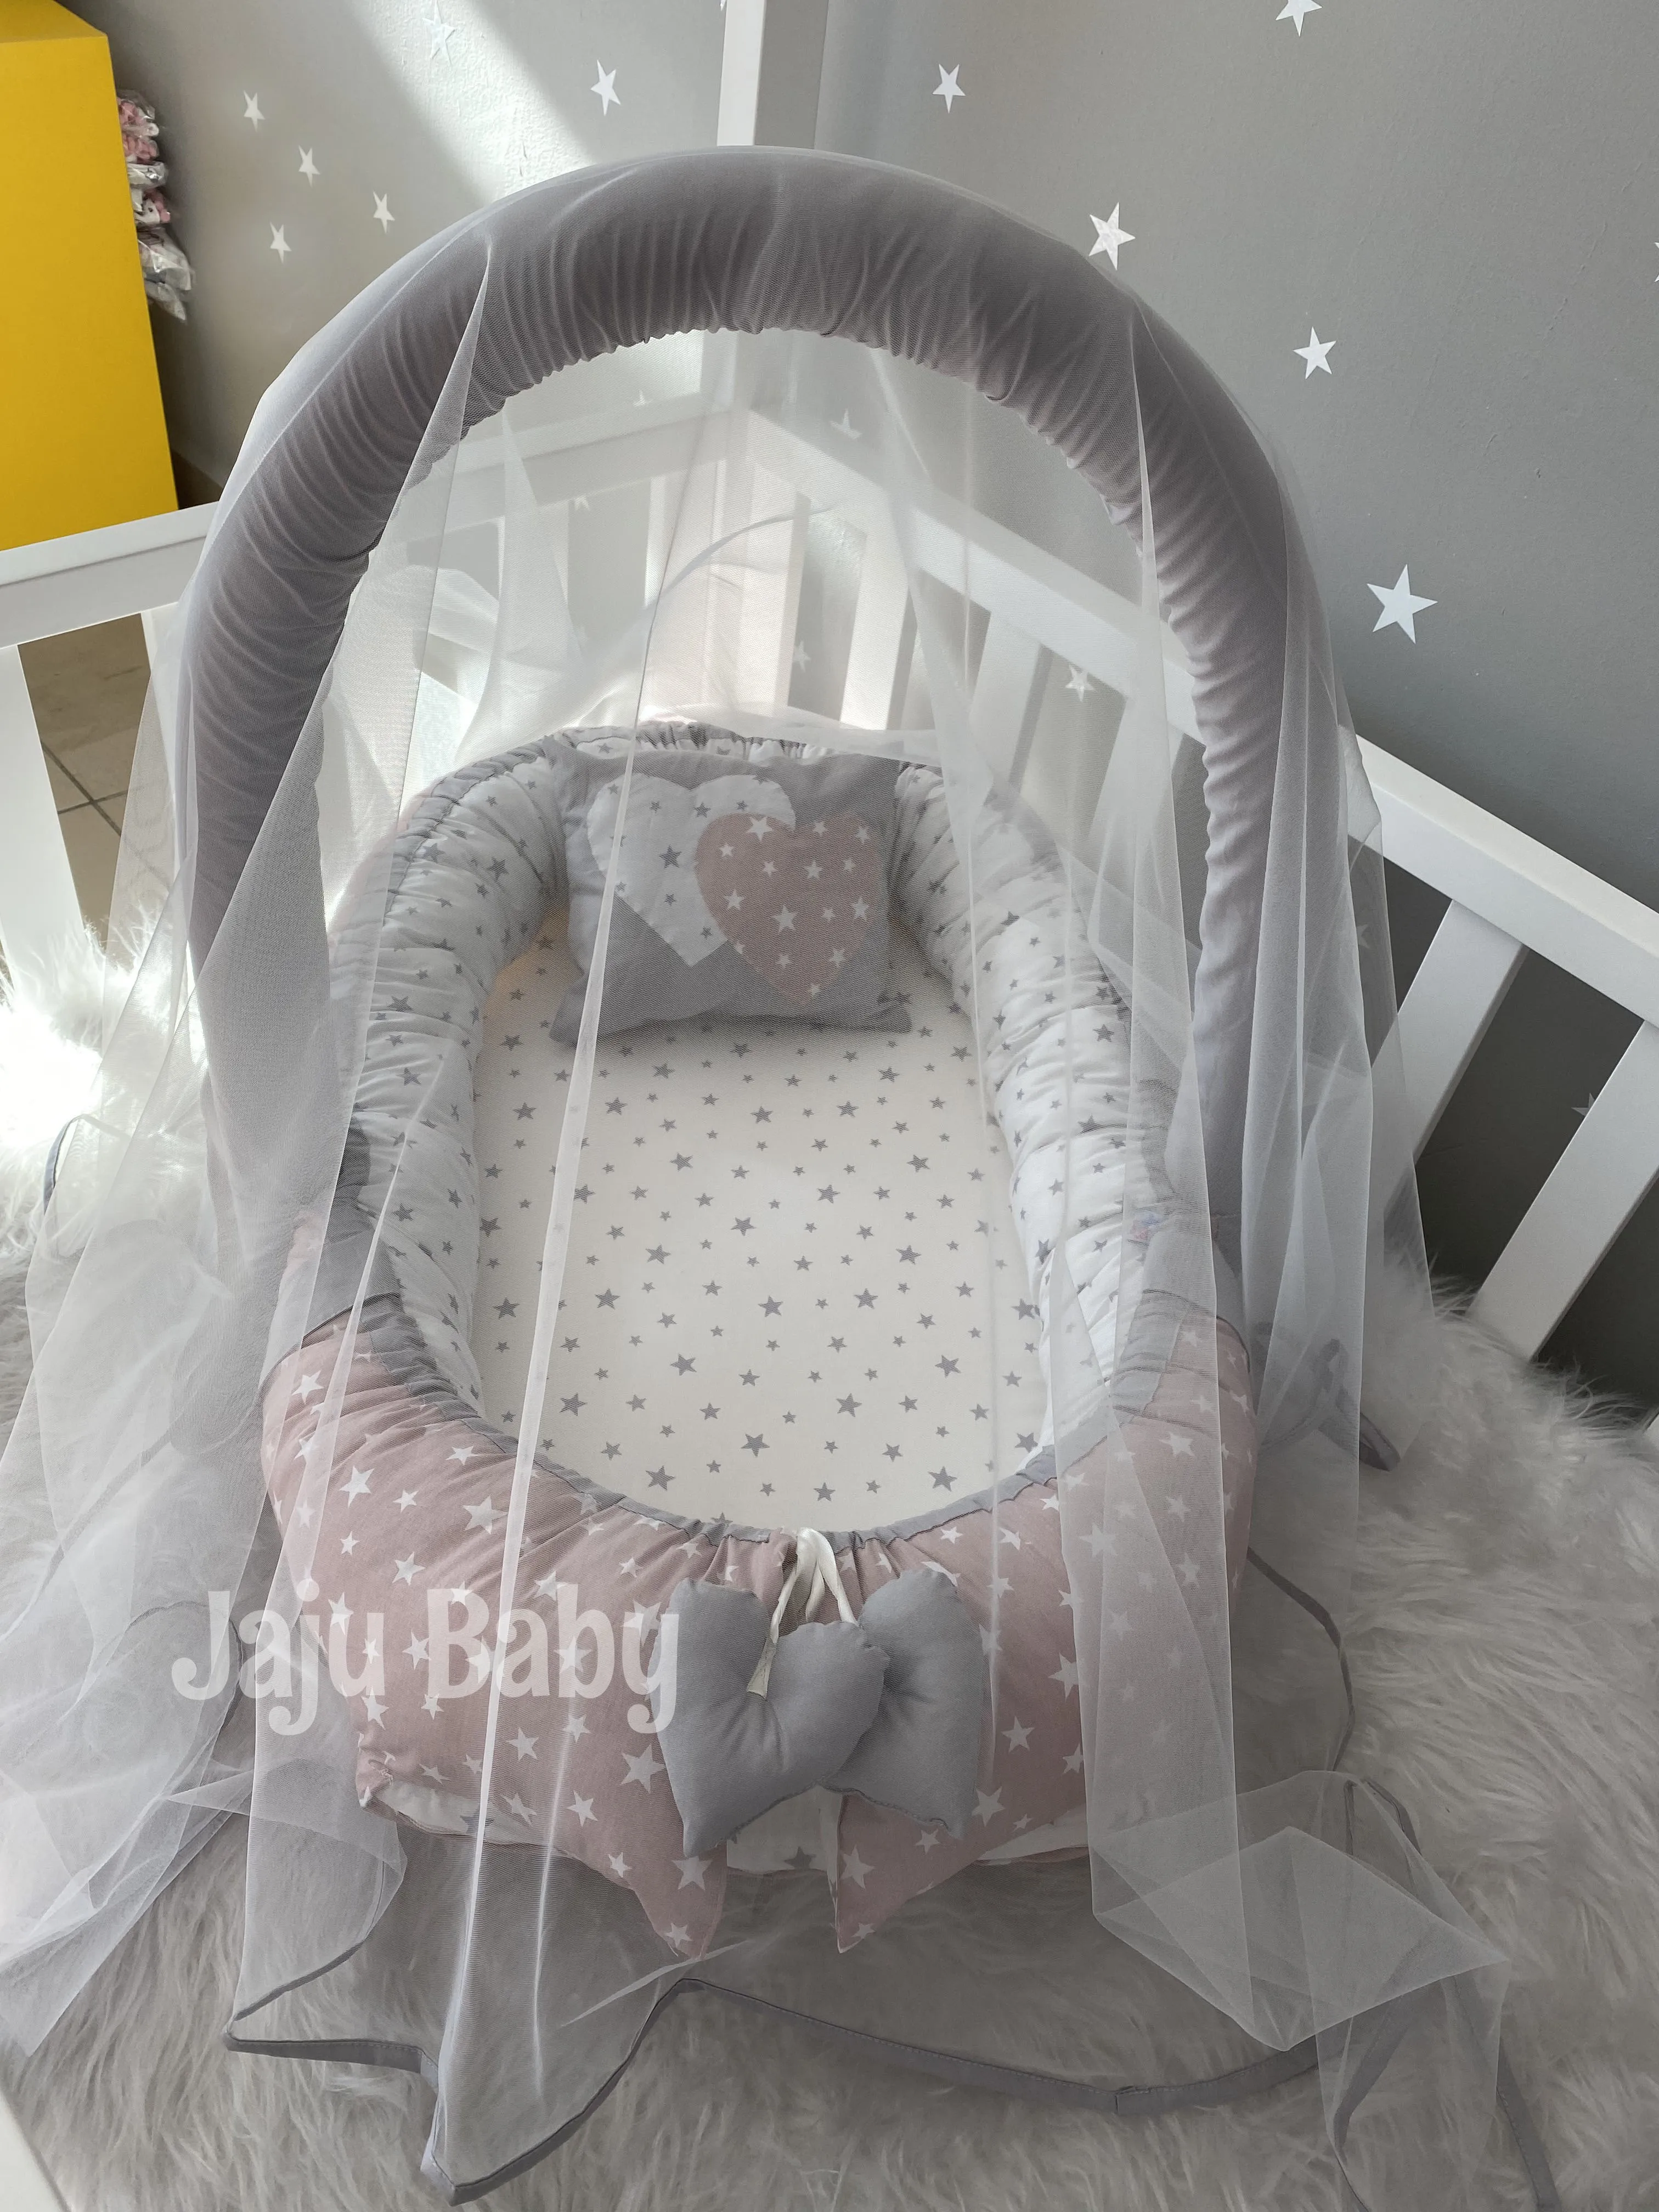 Jaju Baby Handmade Gray and Powder Star Patterned Mosquito Net and Toy Apparatus Luxury Design Babynest Mother Side Portable Bed